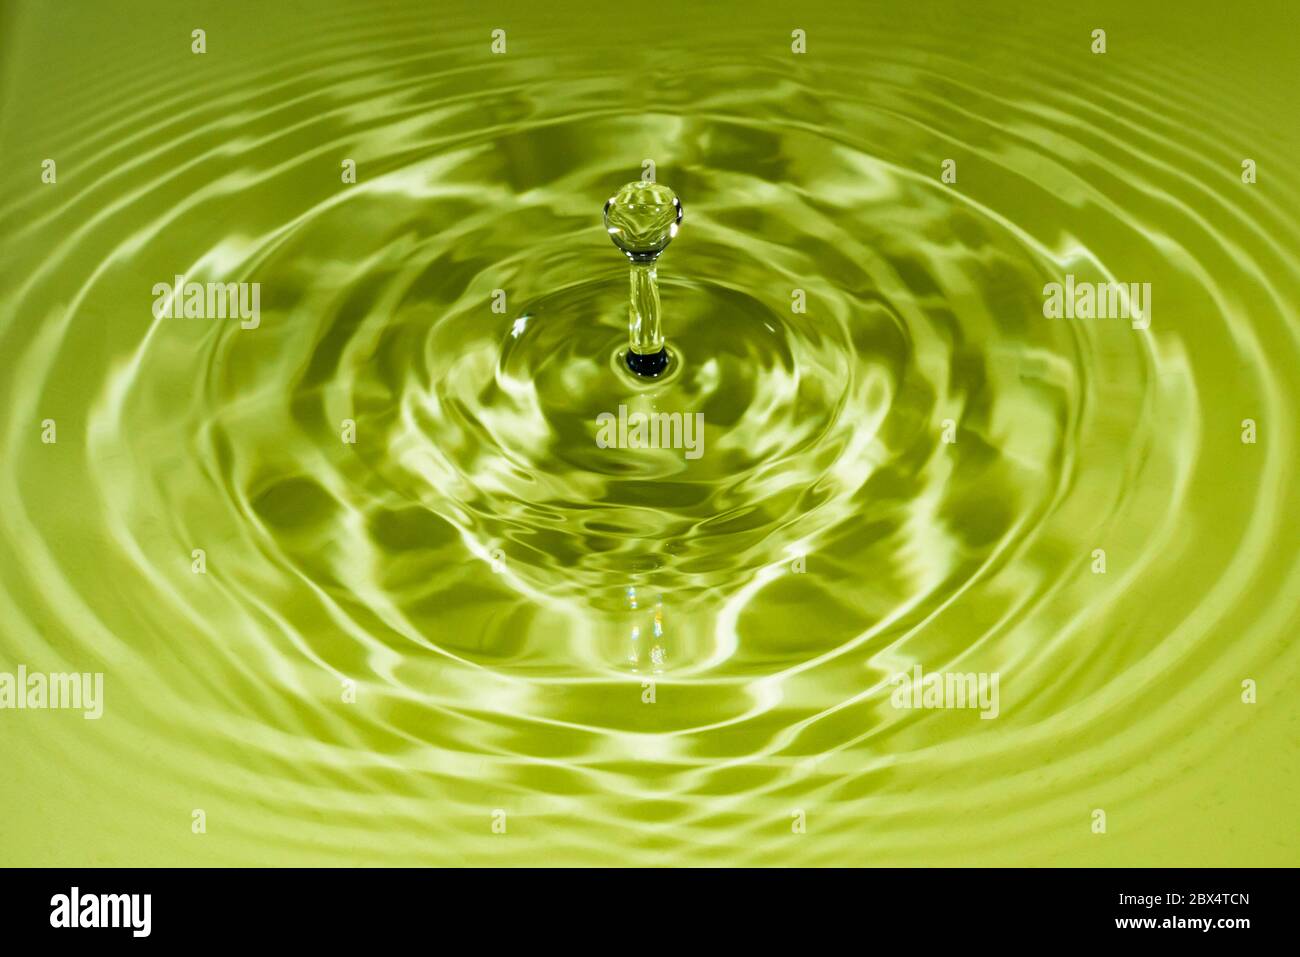 Studio close-up of a high-speed water droplet against a green backdrop Stock Photo